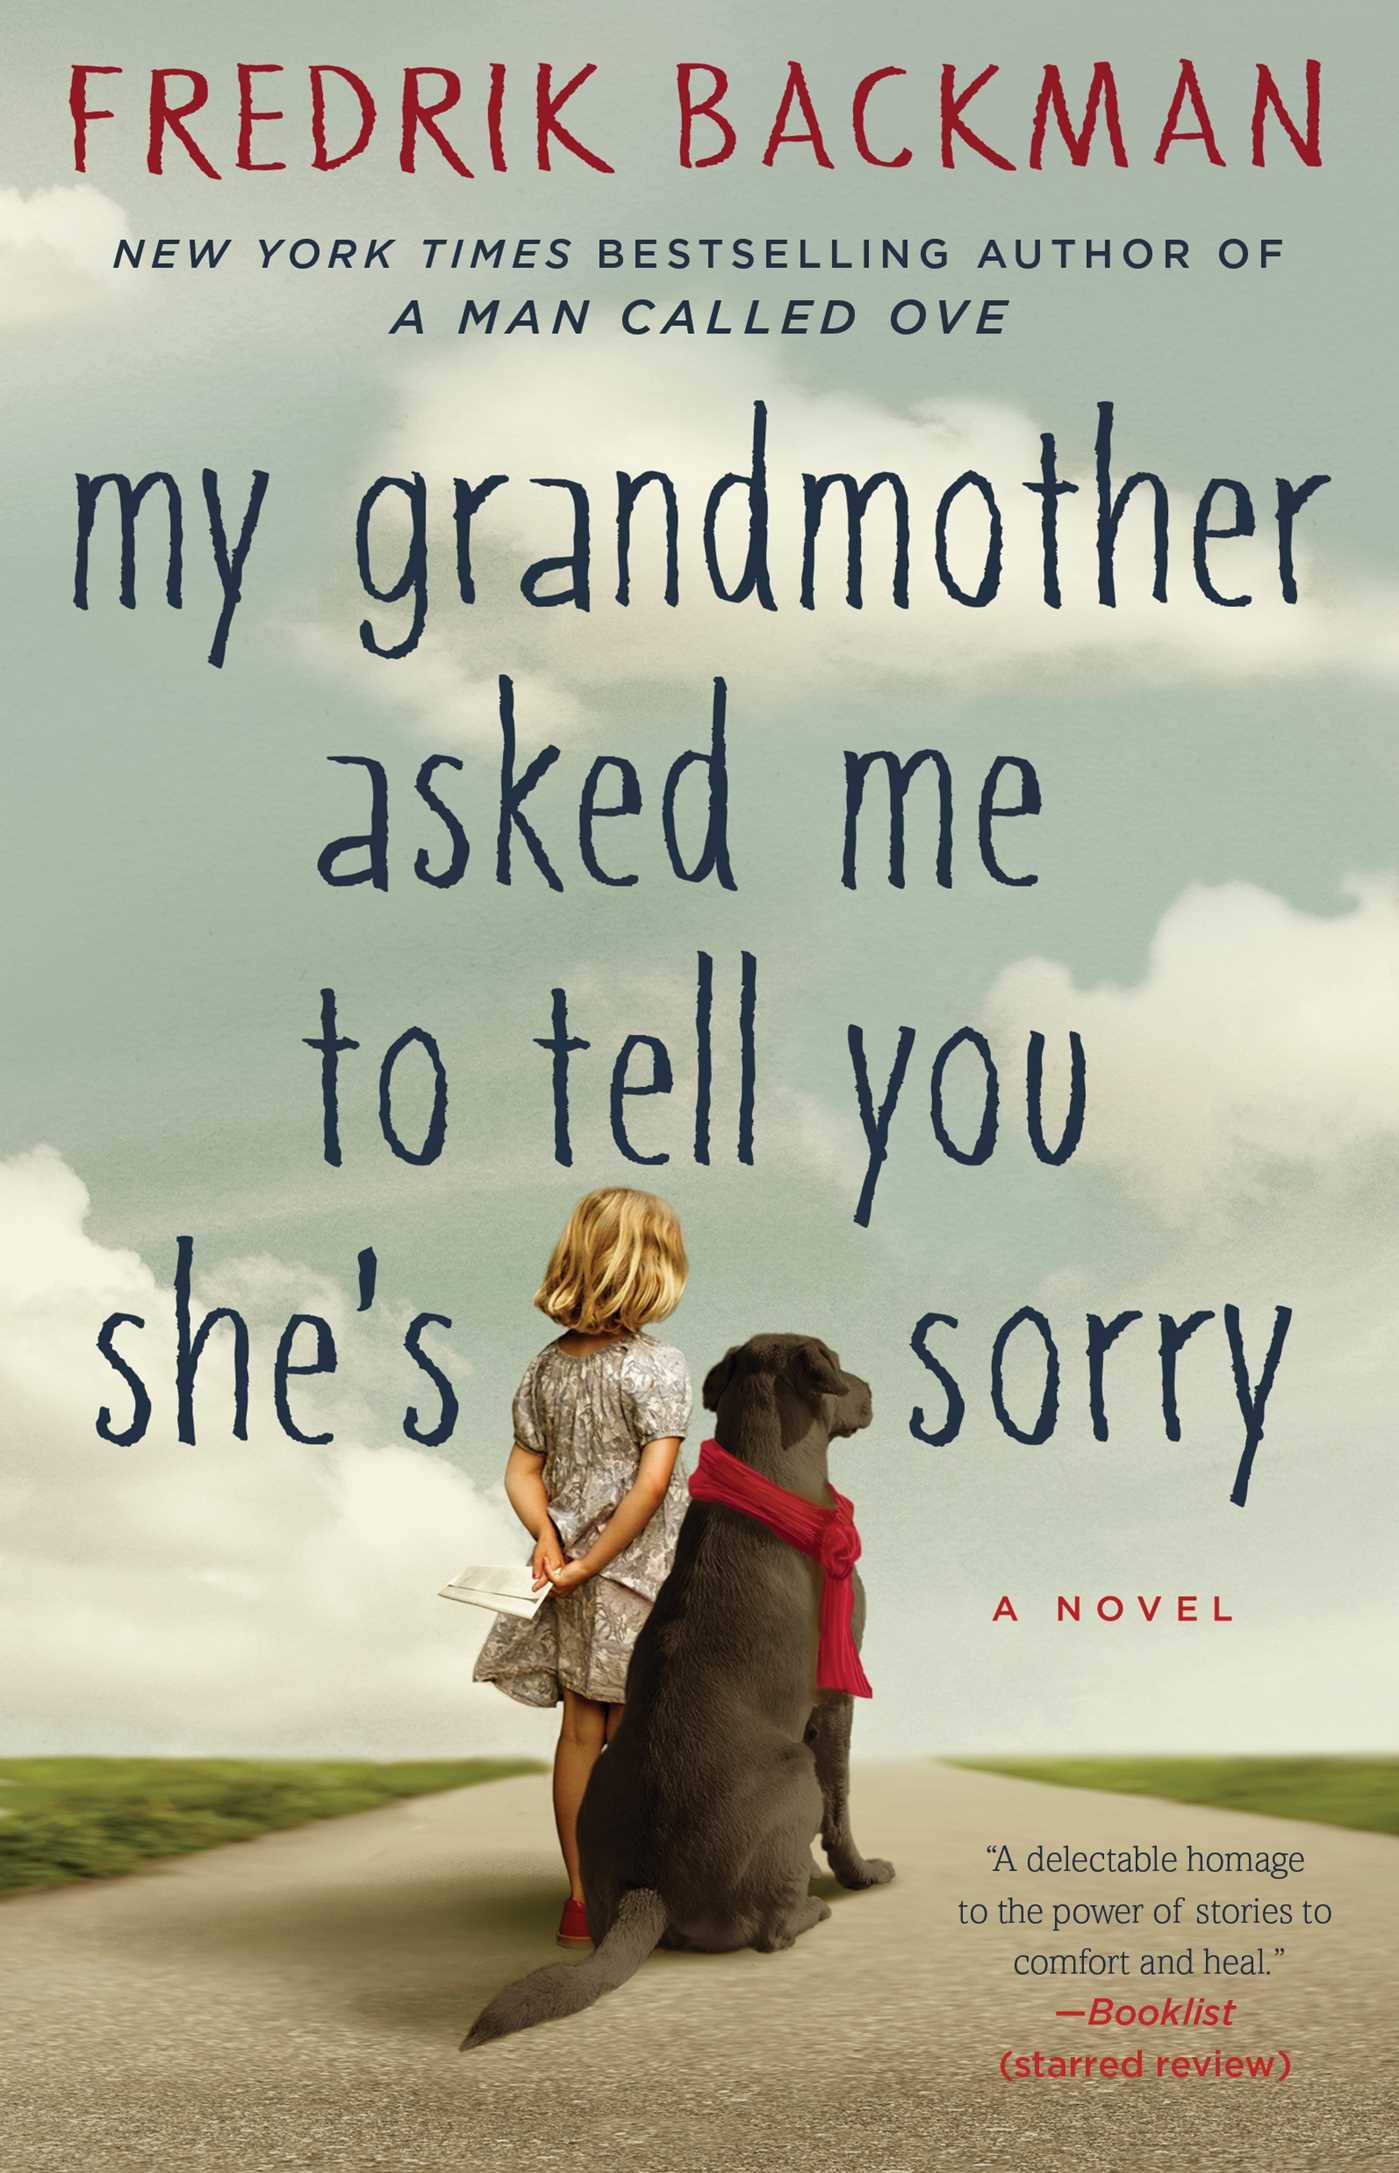 View description for 'My Grandmother Asked Me to Tell You She’s Sorry'